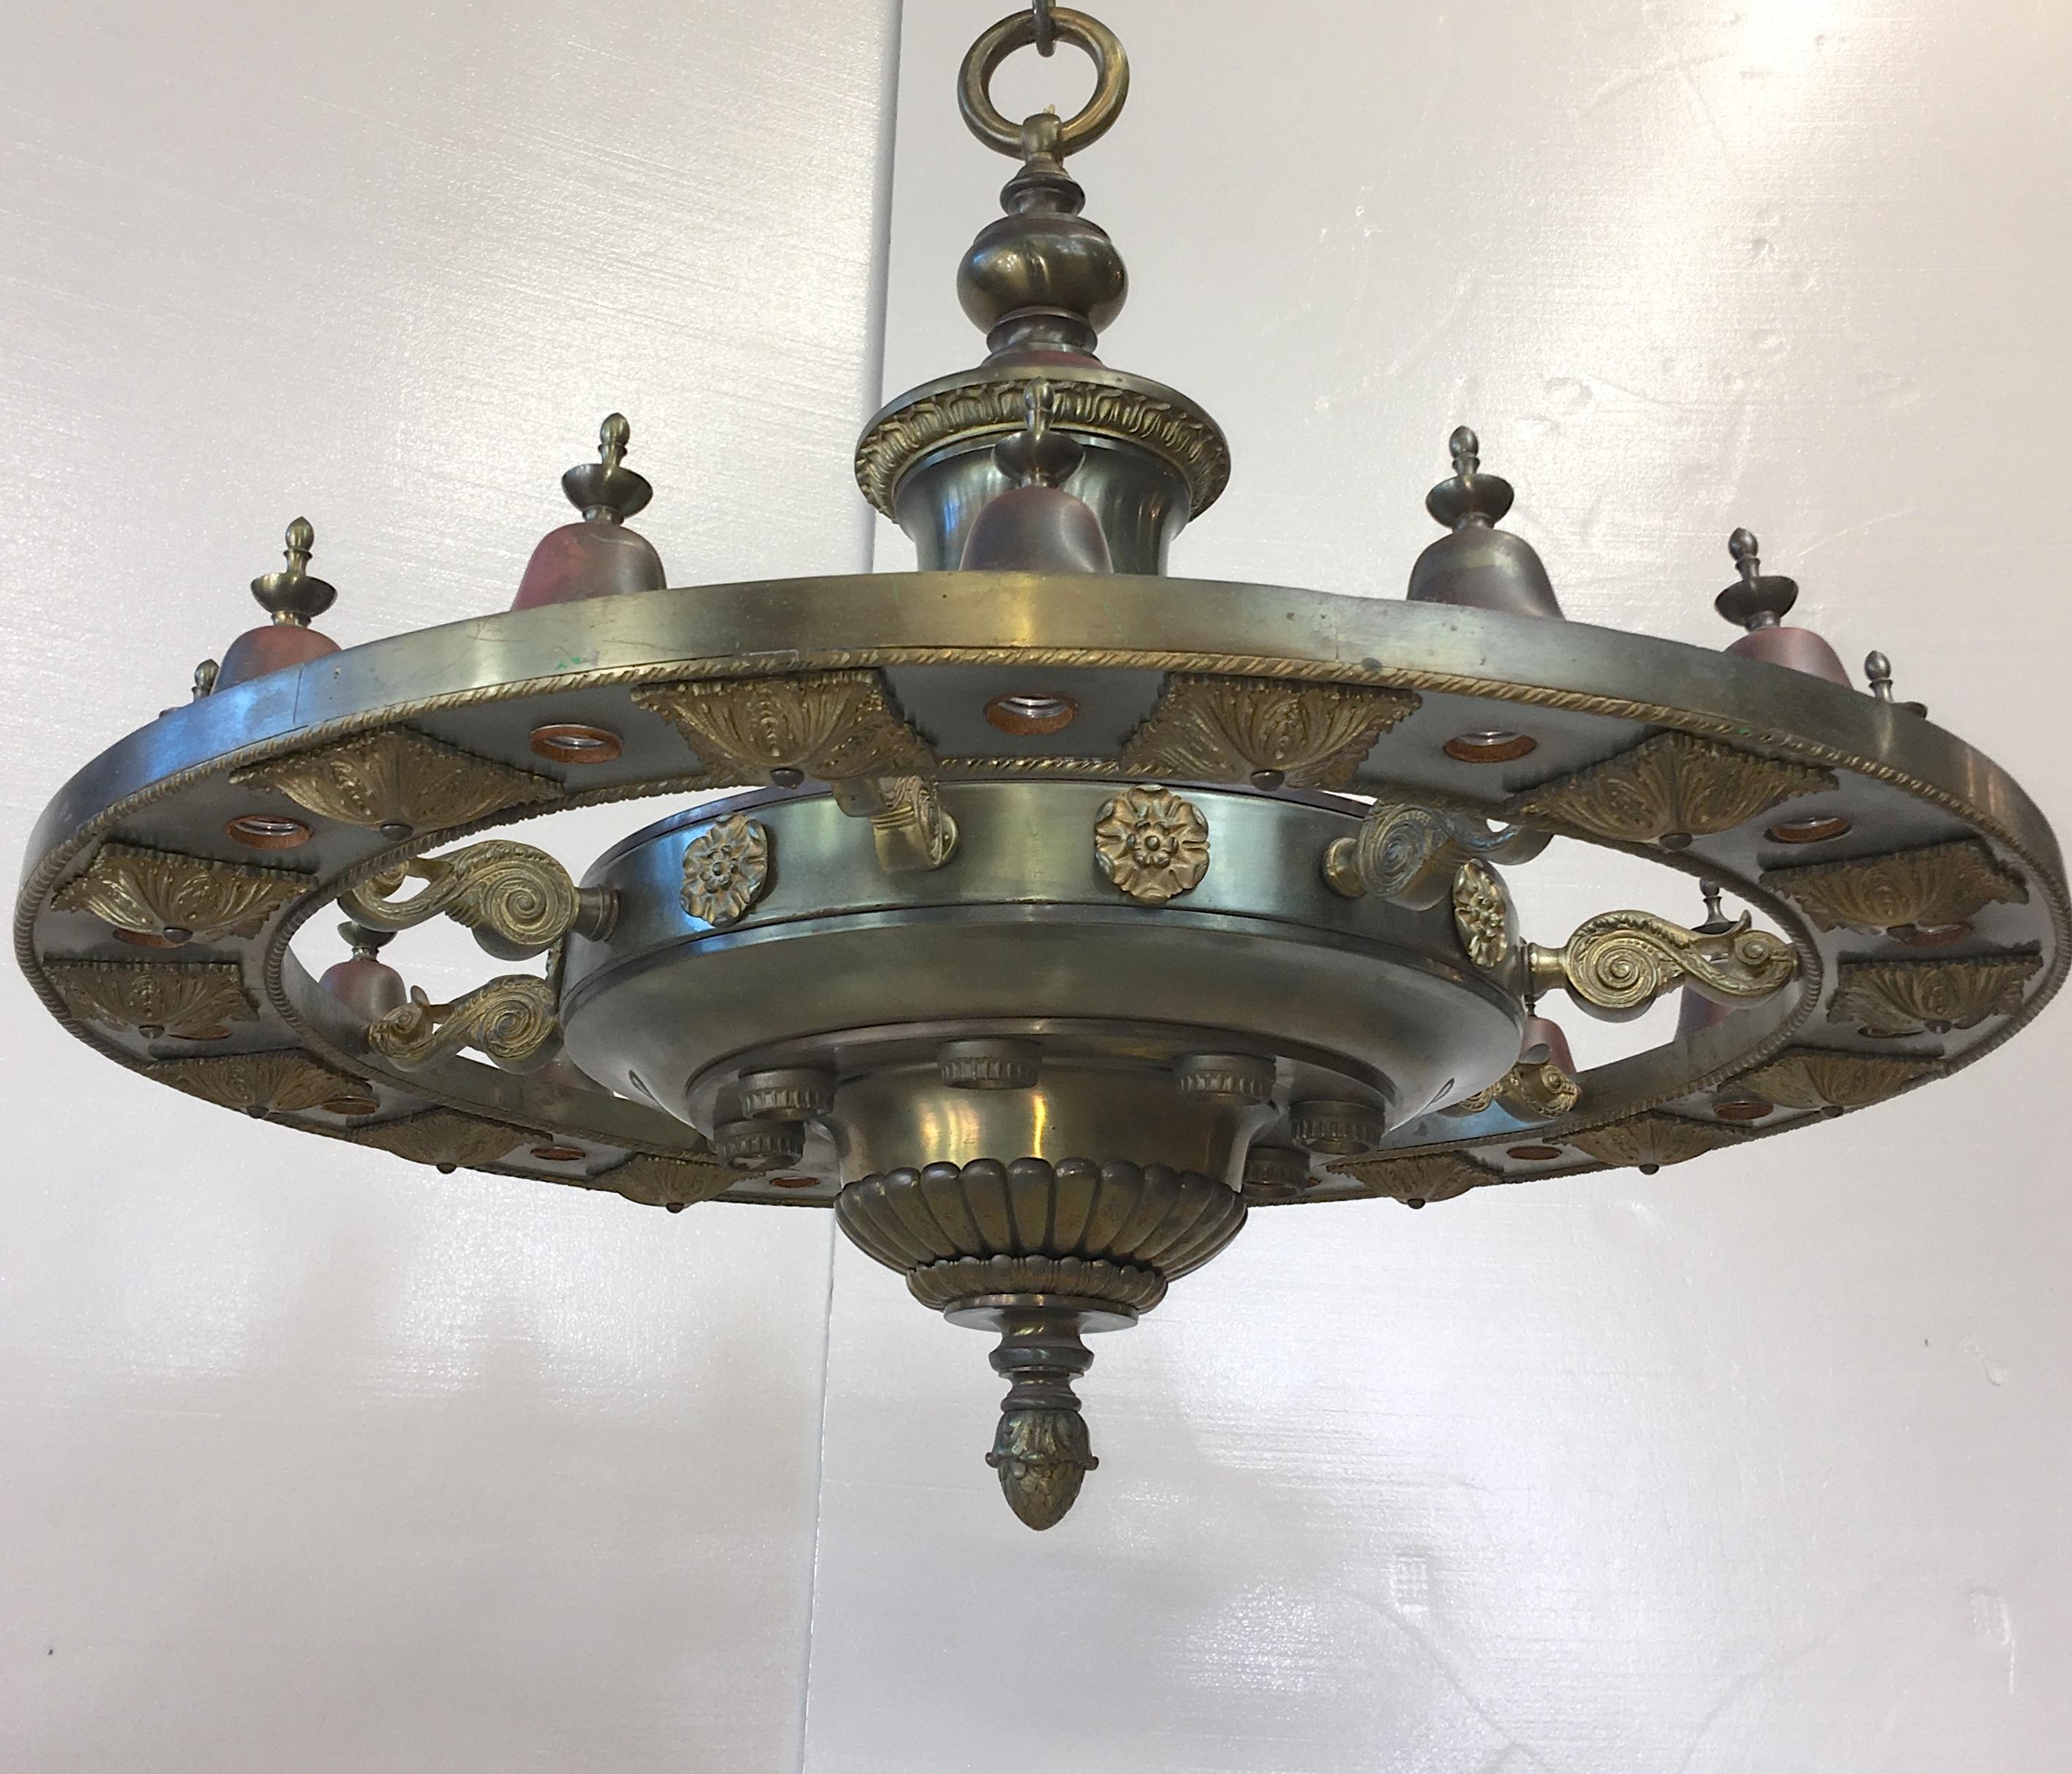 Large bronze and brass chandelier which graced the lobby of the Malden Trust Company bank at 94 Pleasant Street Malden, MA since 1913. The architect was Theodore C. Visscher of NY together with prominent bank builders, Hoggson Brothers who specified